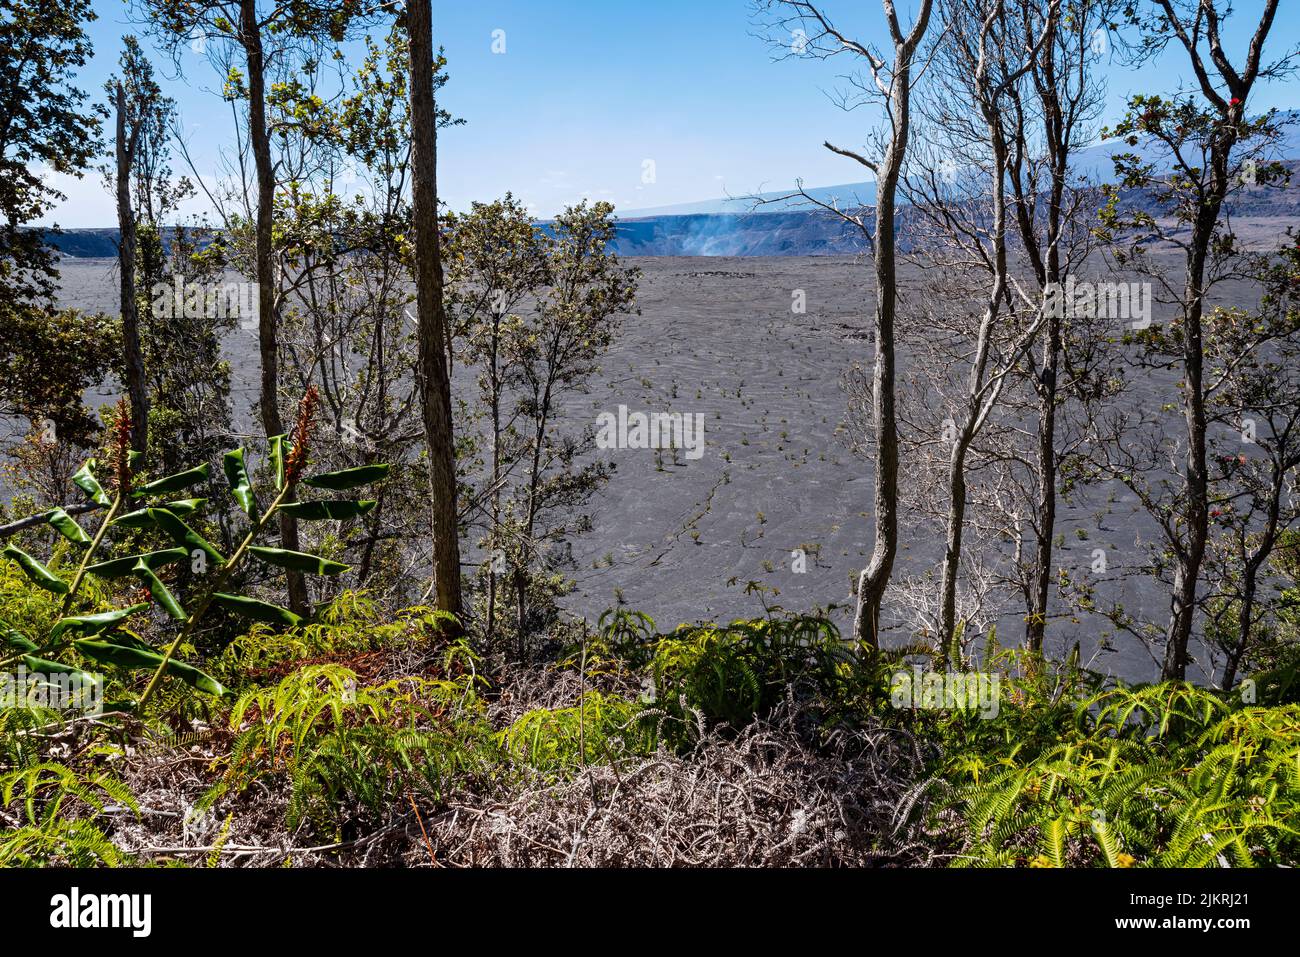 halemaumau crater and lava plain viewed from crater rim trail at hawaii volcanoes national park Stock Photo